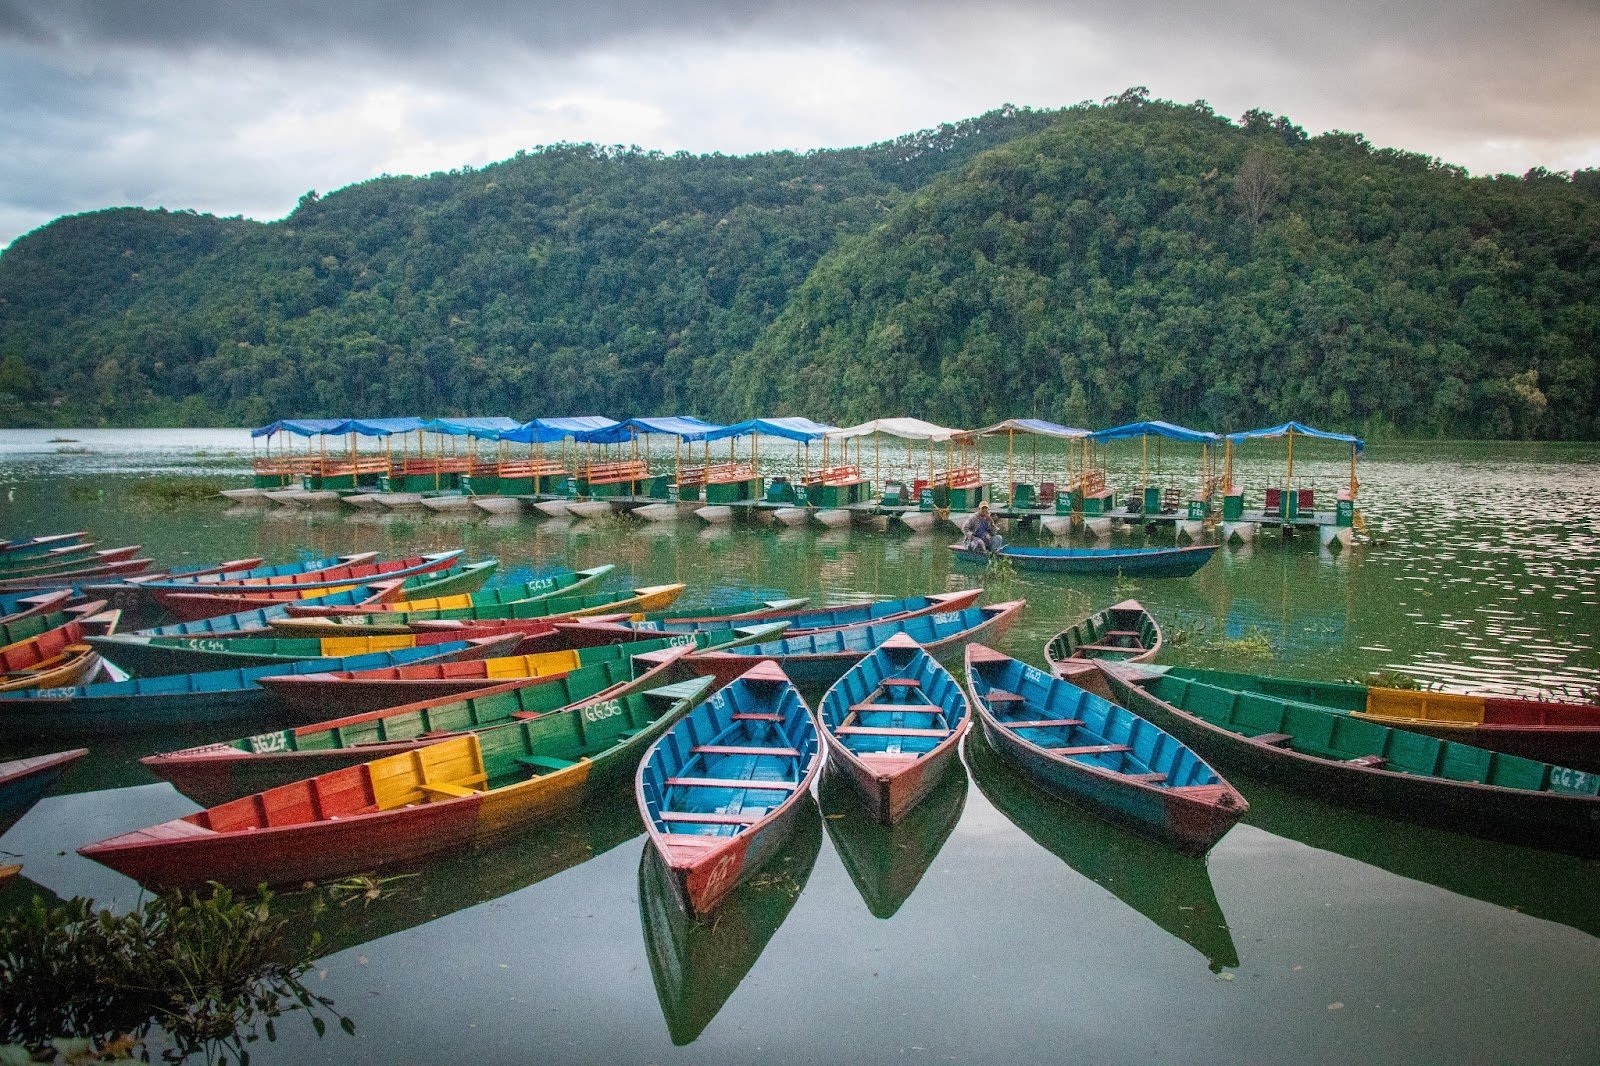 Elevate Trek- Group of boats on Phewa Lake, Pokhara, with a single boater in the center of one boat